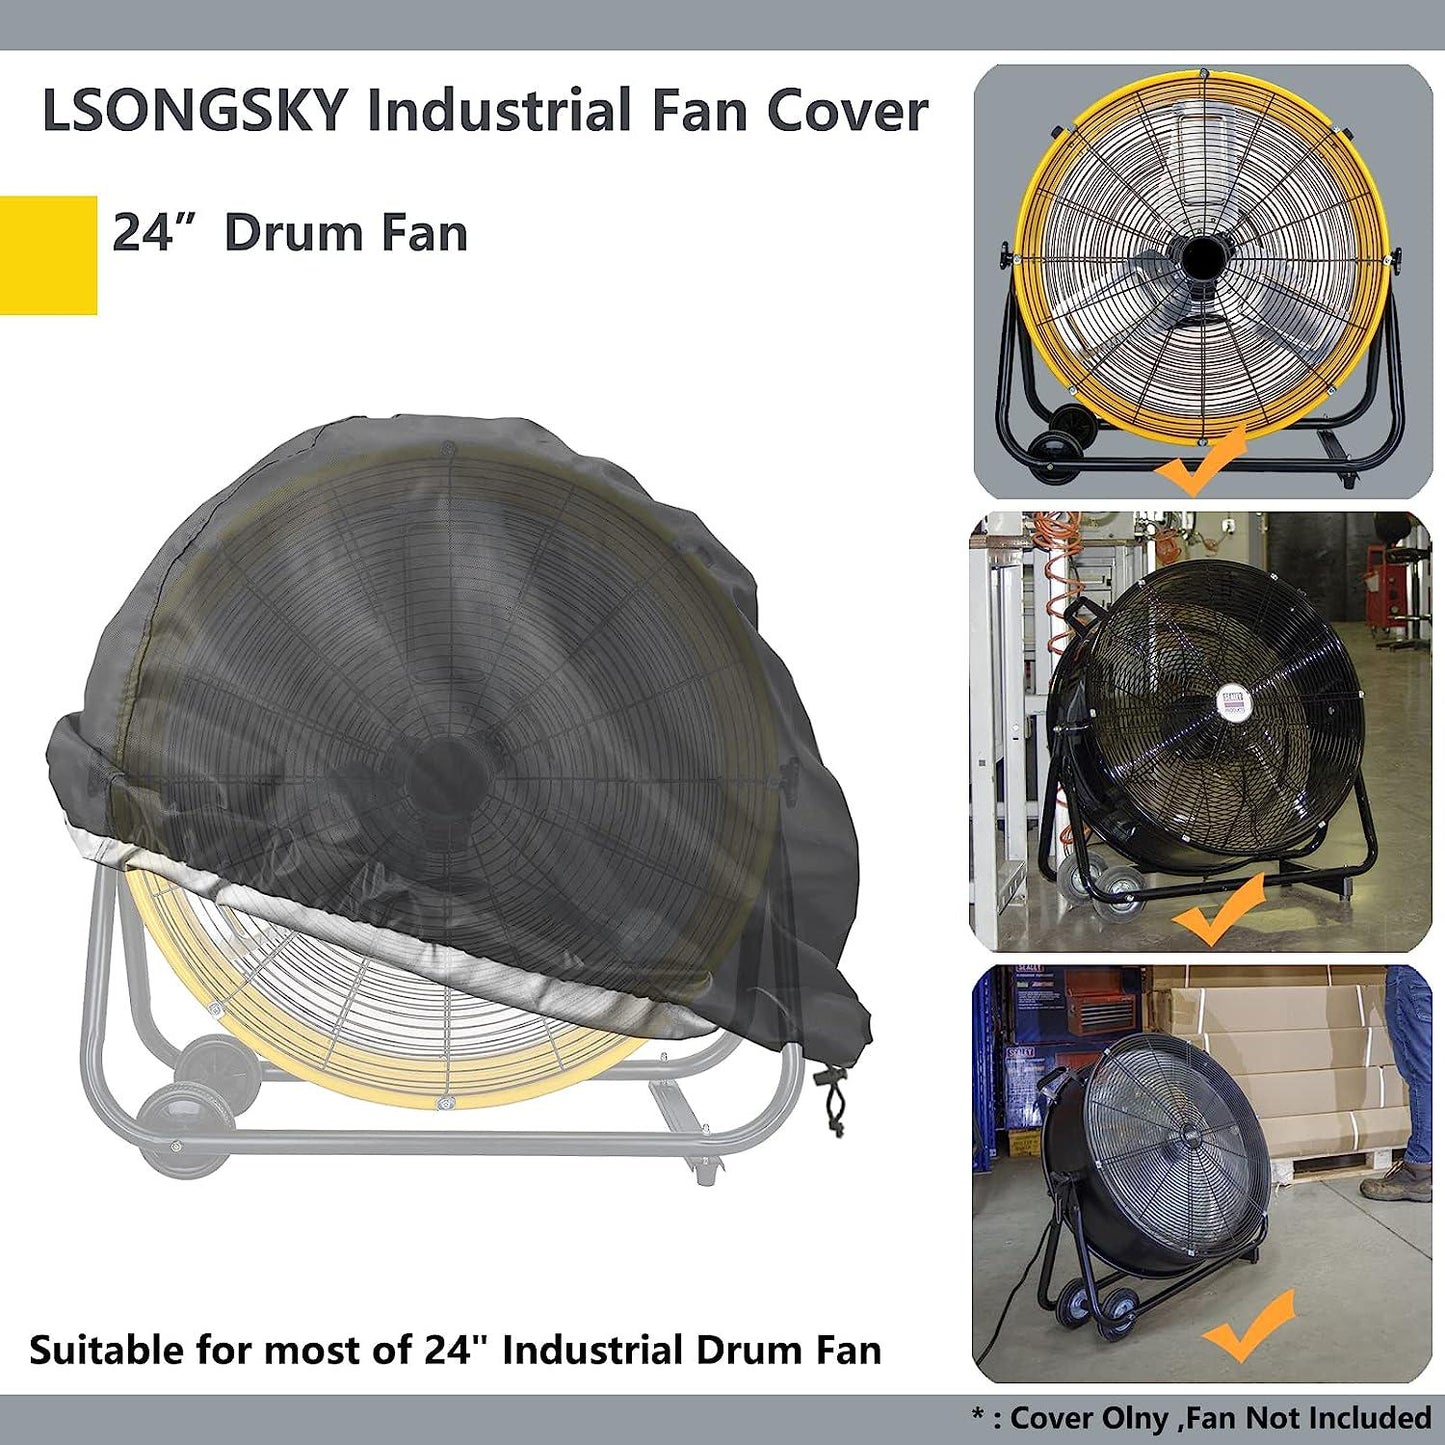 Industrial Fan Cover,Waterproof&Dustproof Cover Suitable for 24 High Velocity Movement Heavy Duty Drum Fan,Fits up to 29.9 x 8.6 x 29.9 inches,Black